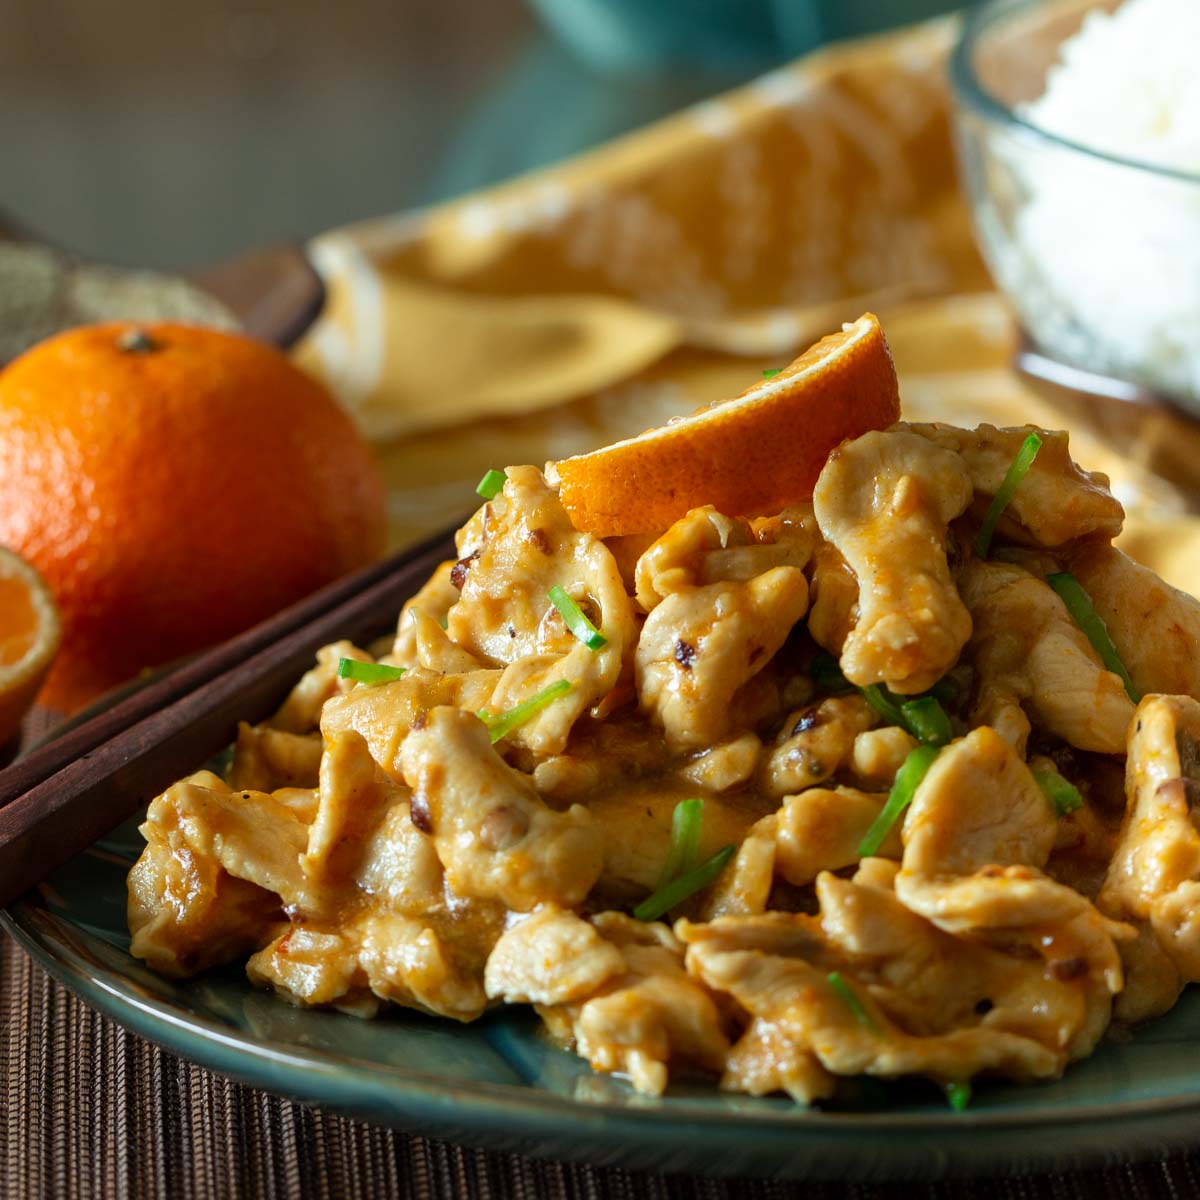 Stir fried hot and spicy mandarin orange chicken on a blue plate garnished with oranges and green onions.